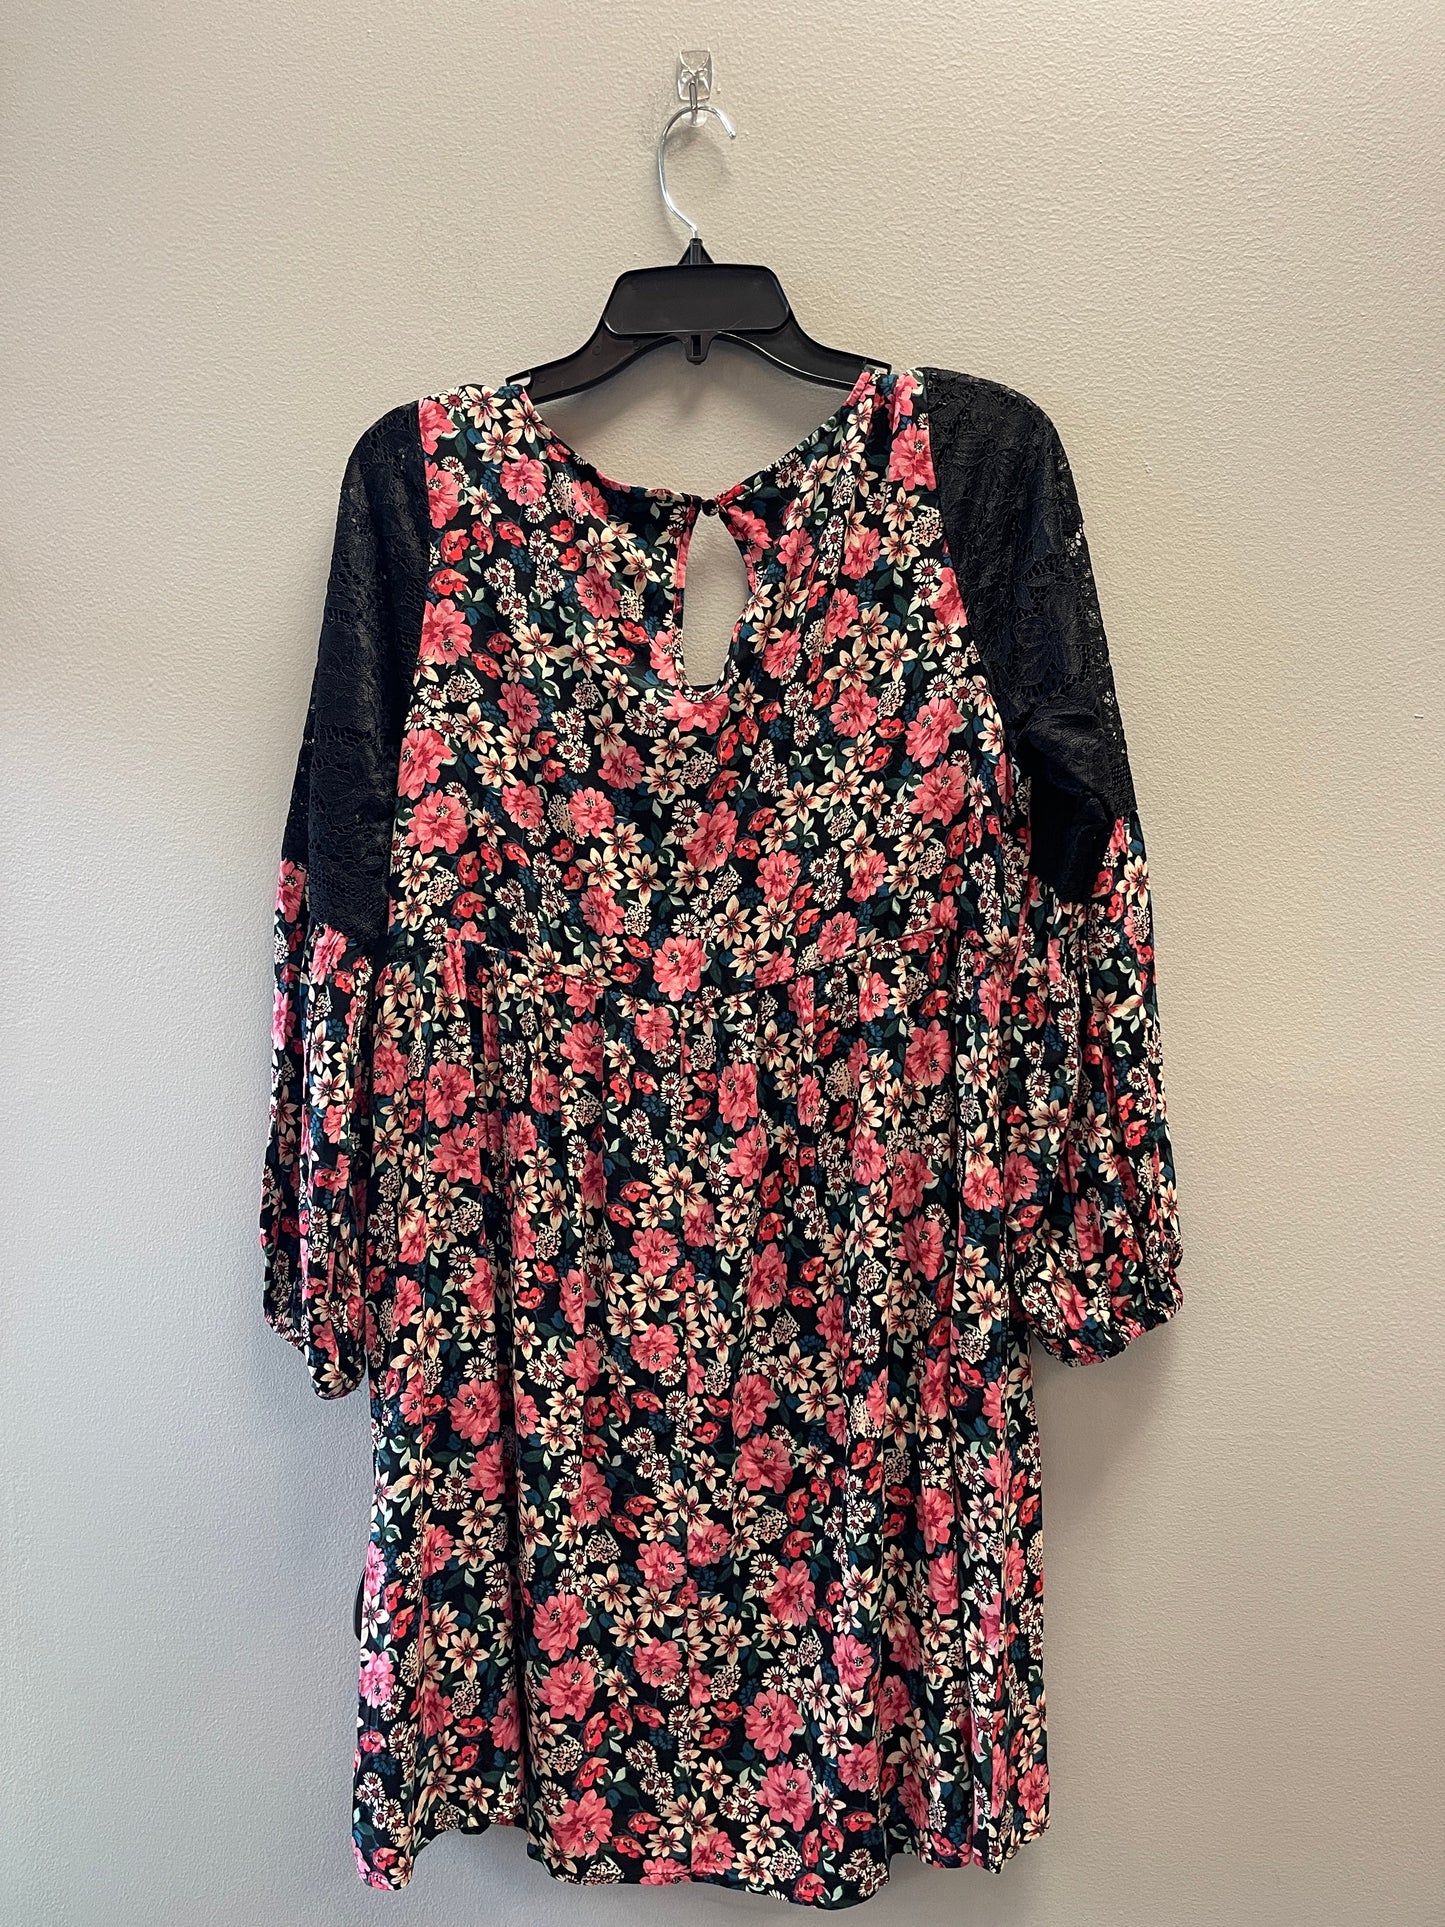 Dress Casual Short By Torrid  Size: 12